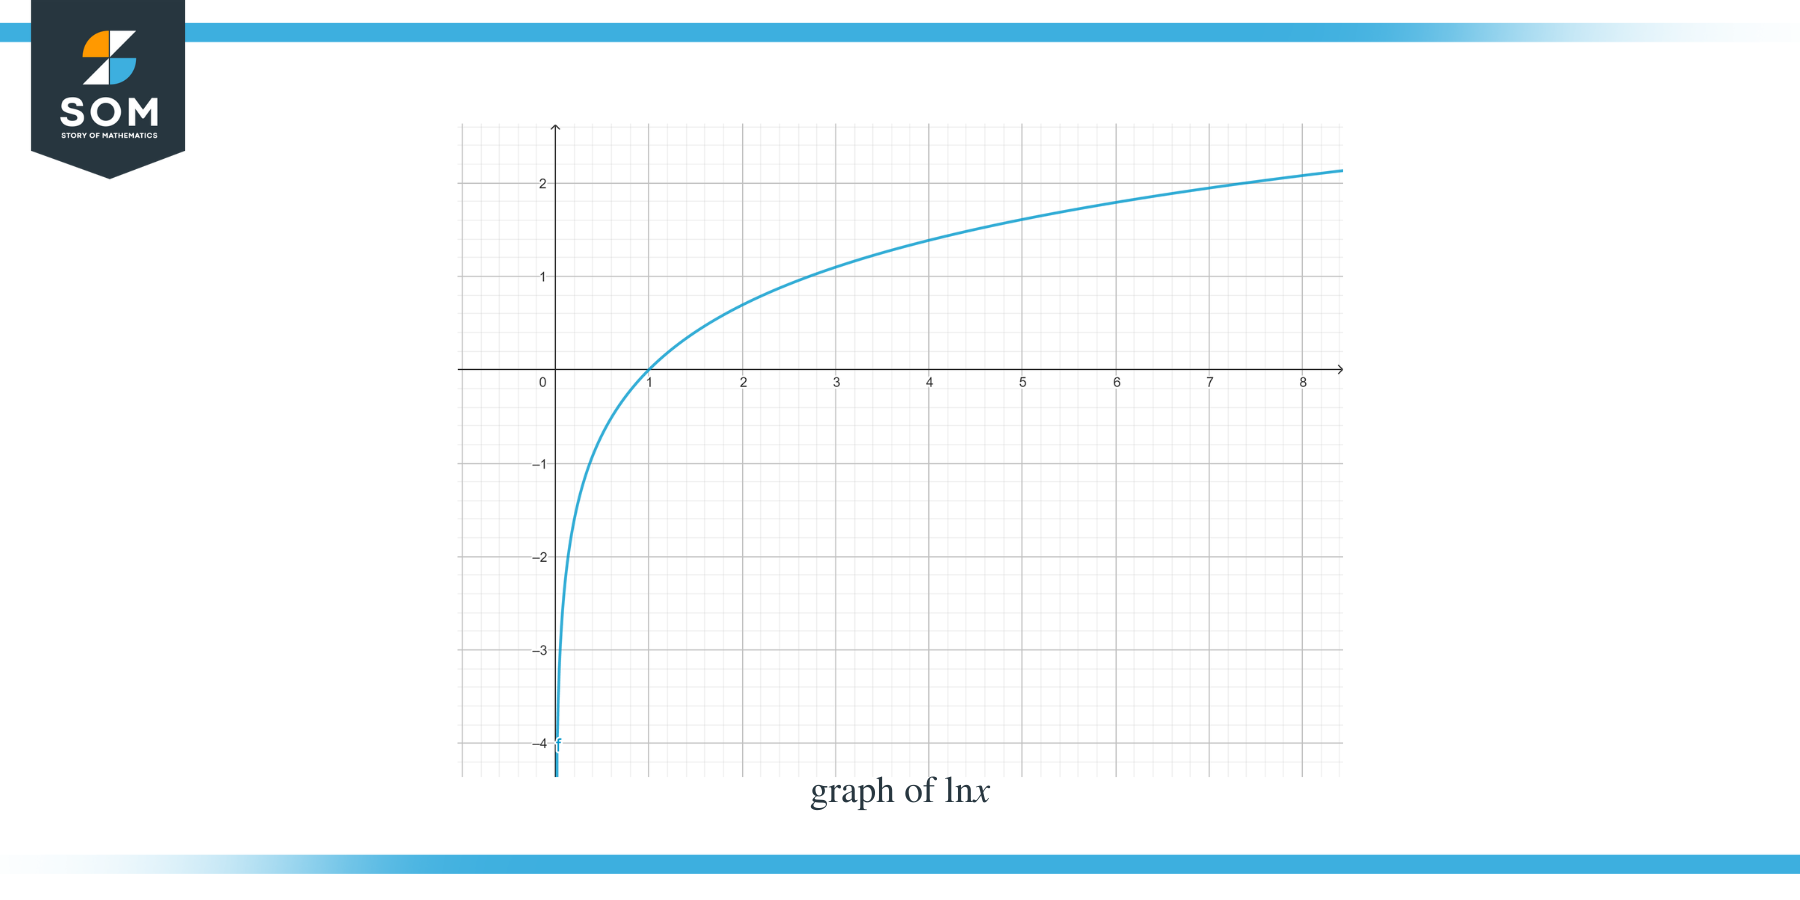 Can you draw grpah of lnx first graph